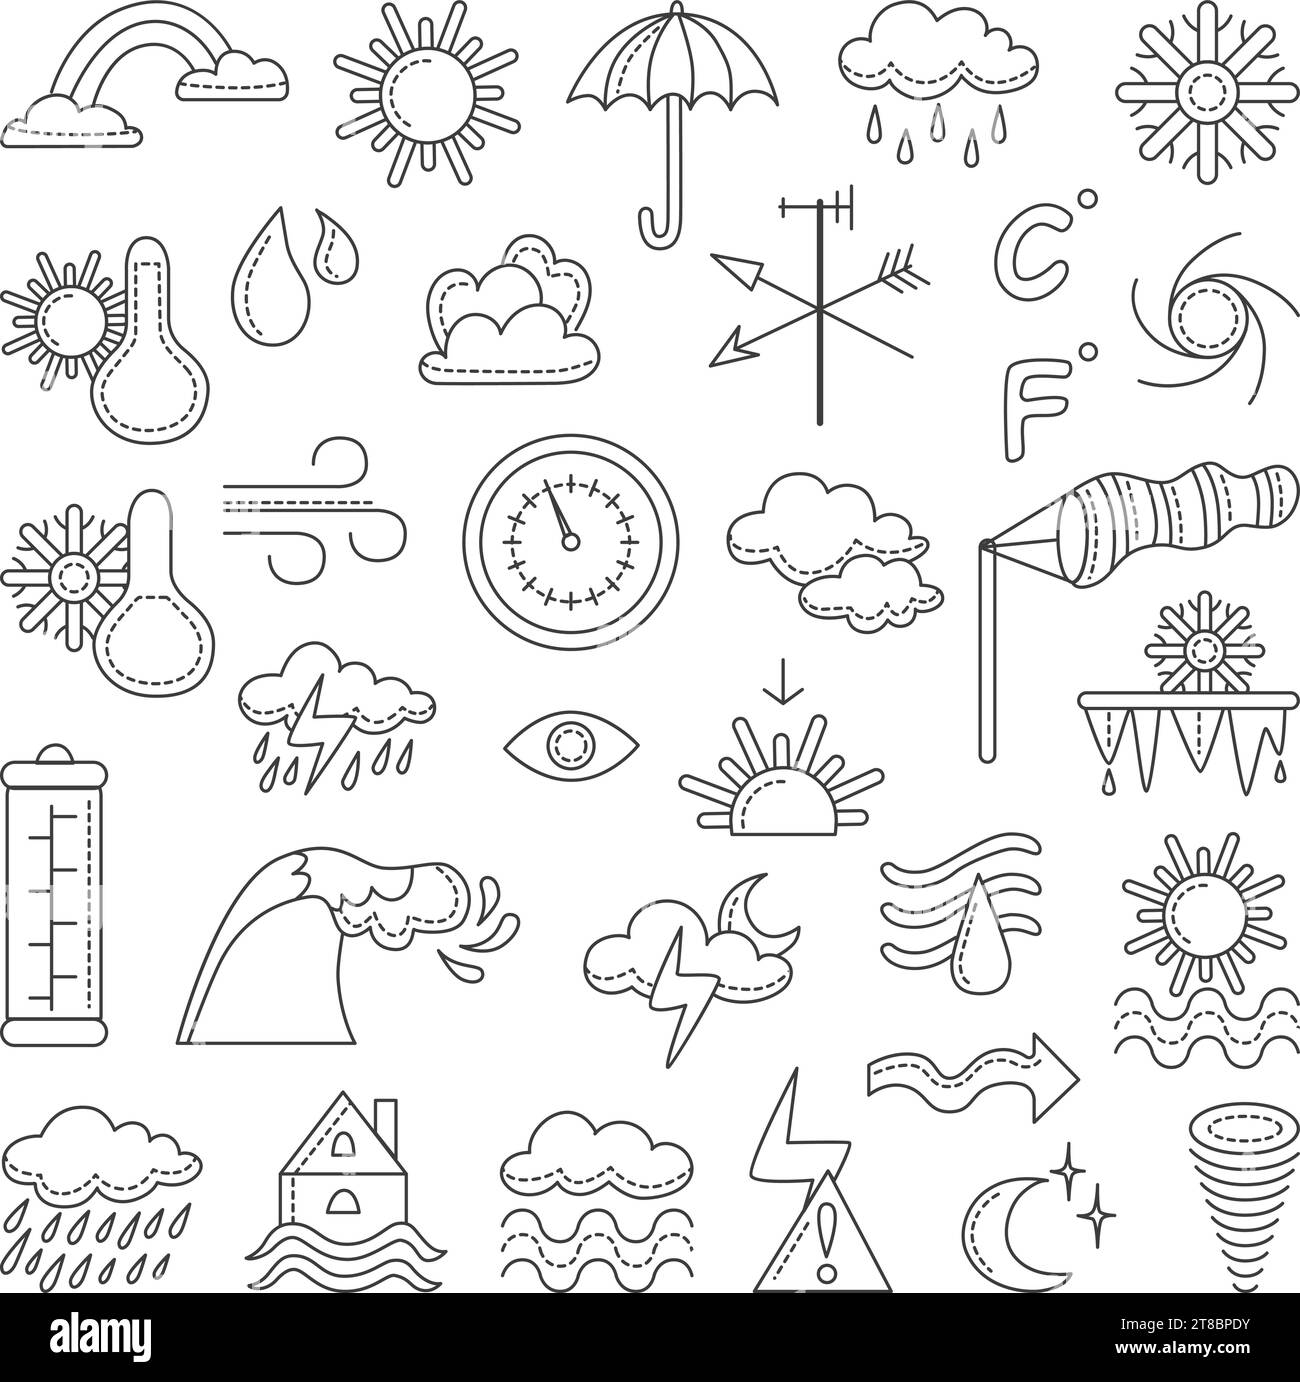 Meteorology doodle set. Weather icons, clouds and raindrops, sun and snowflakes. Isolated seasonal forecast, windy and rainy neoteric vector symbols Stock Vector